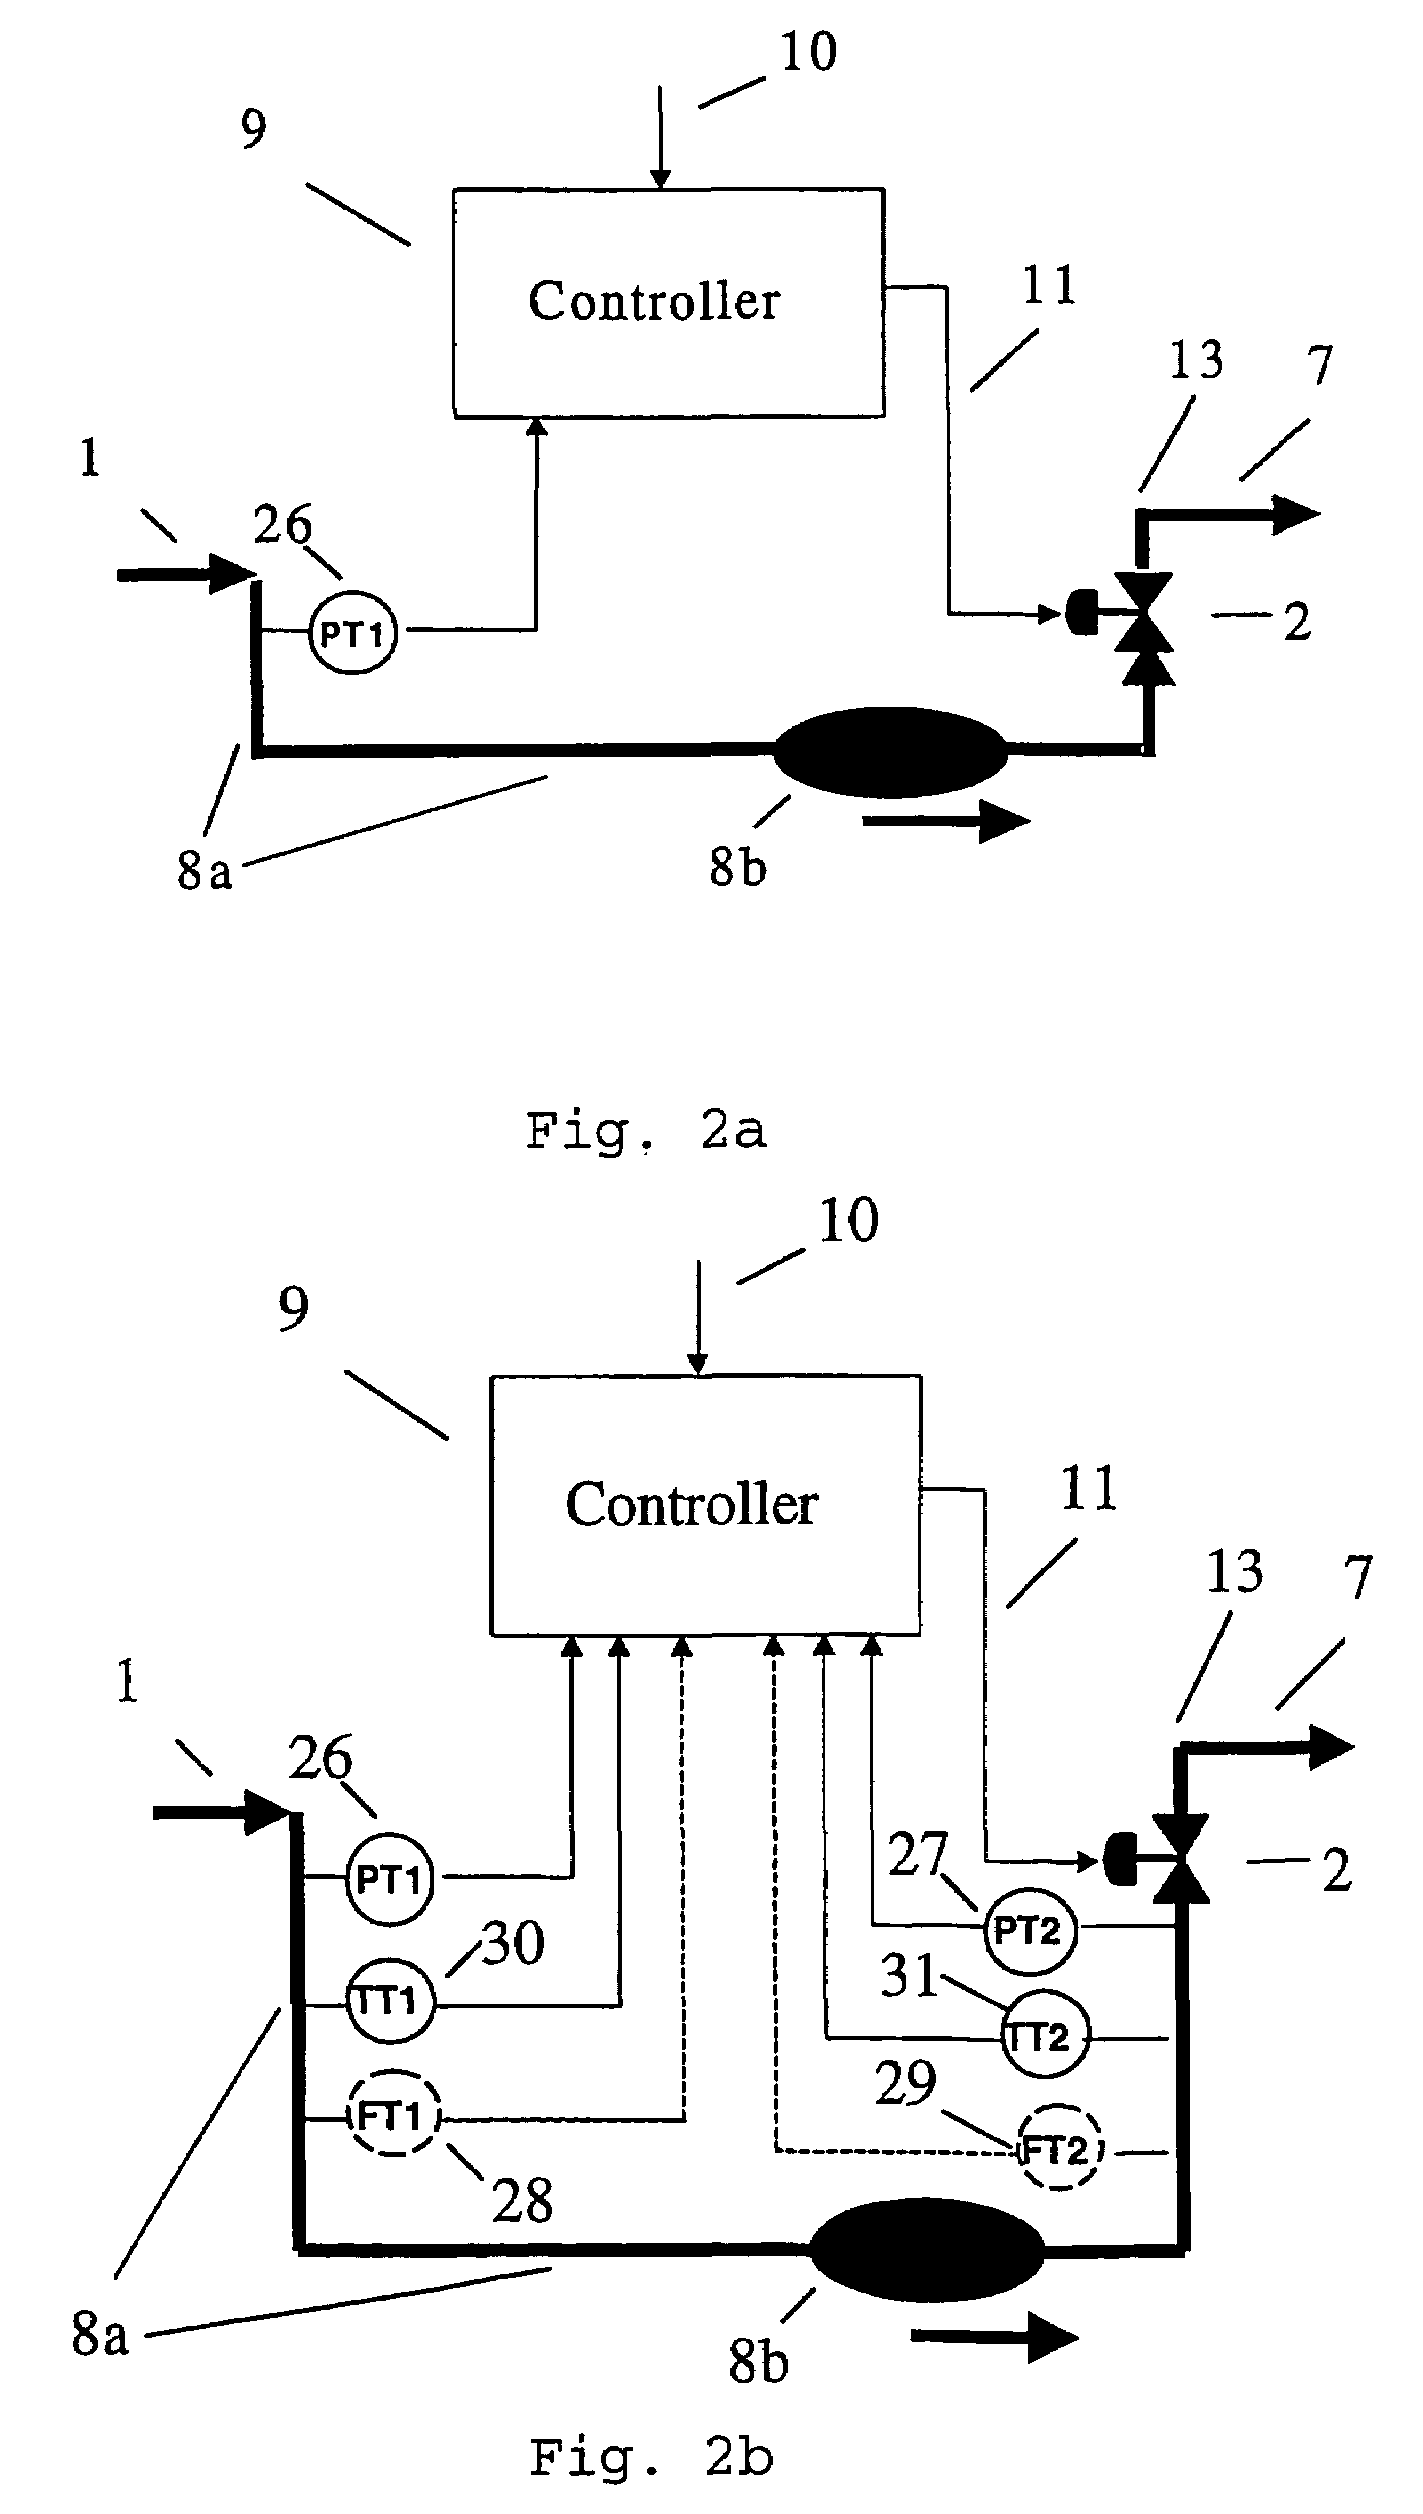 Method, computer program product and use of a computer program for stabilizing a multiphase flow